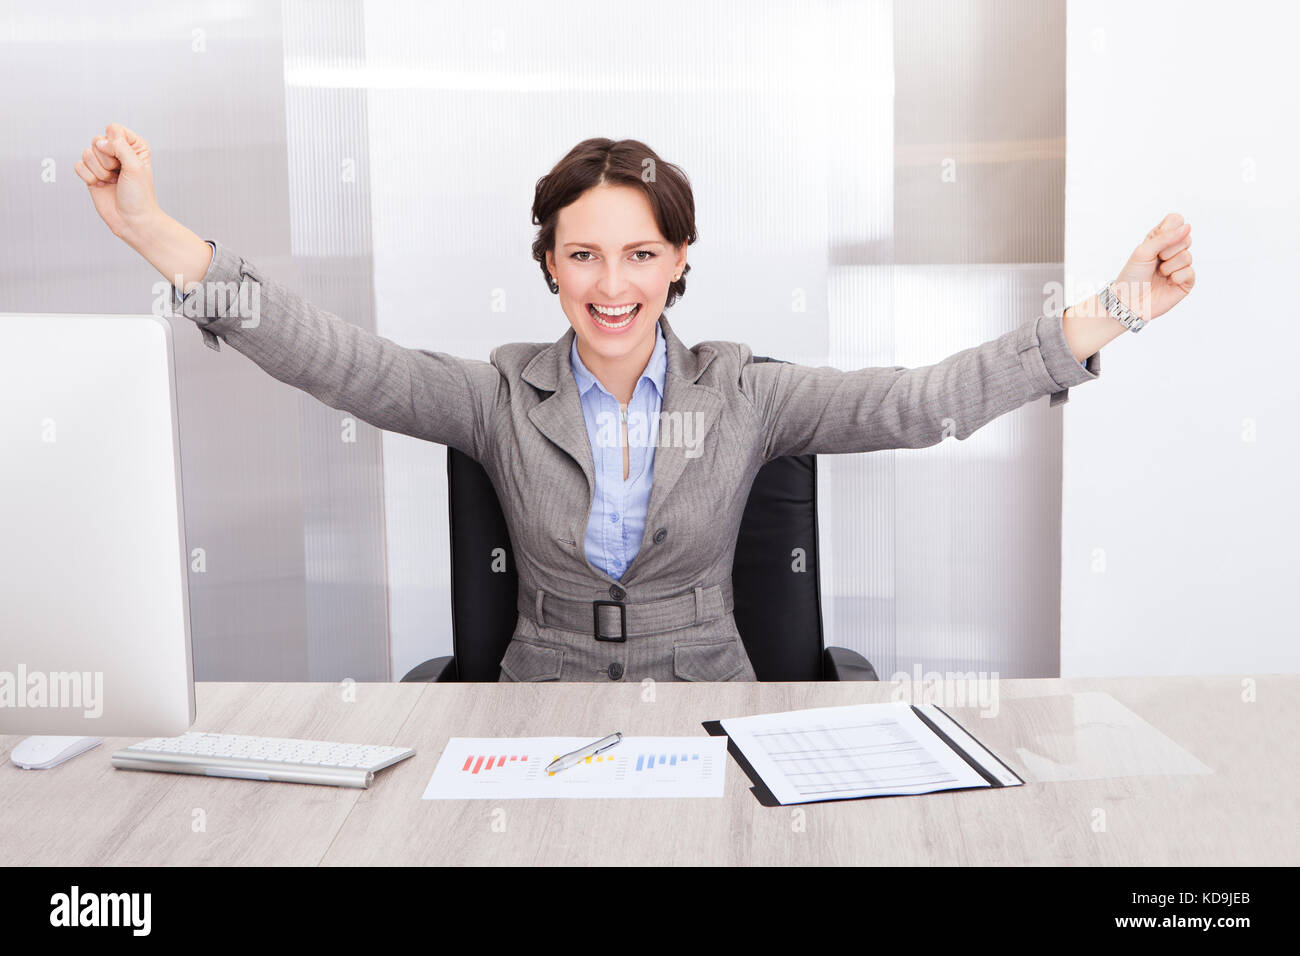 Successful Excited Young Businesswoman With Hand Extended Stock Photo